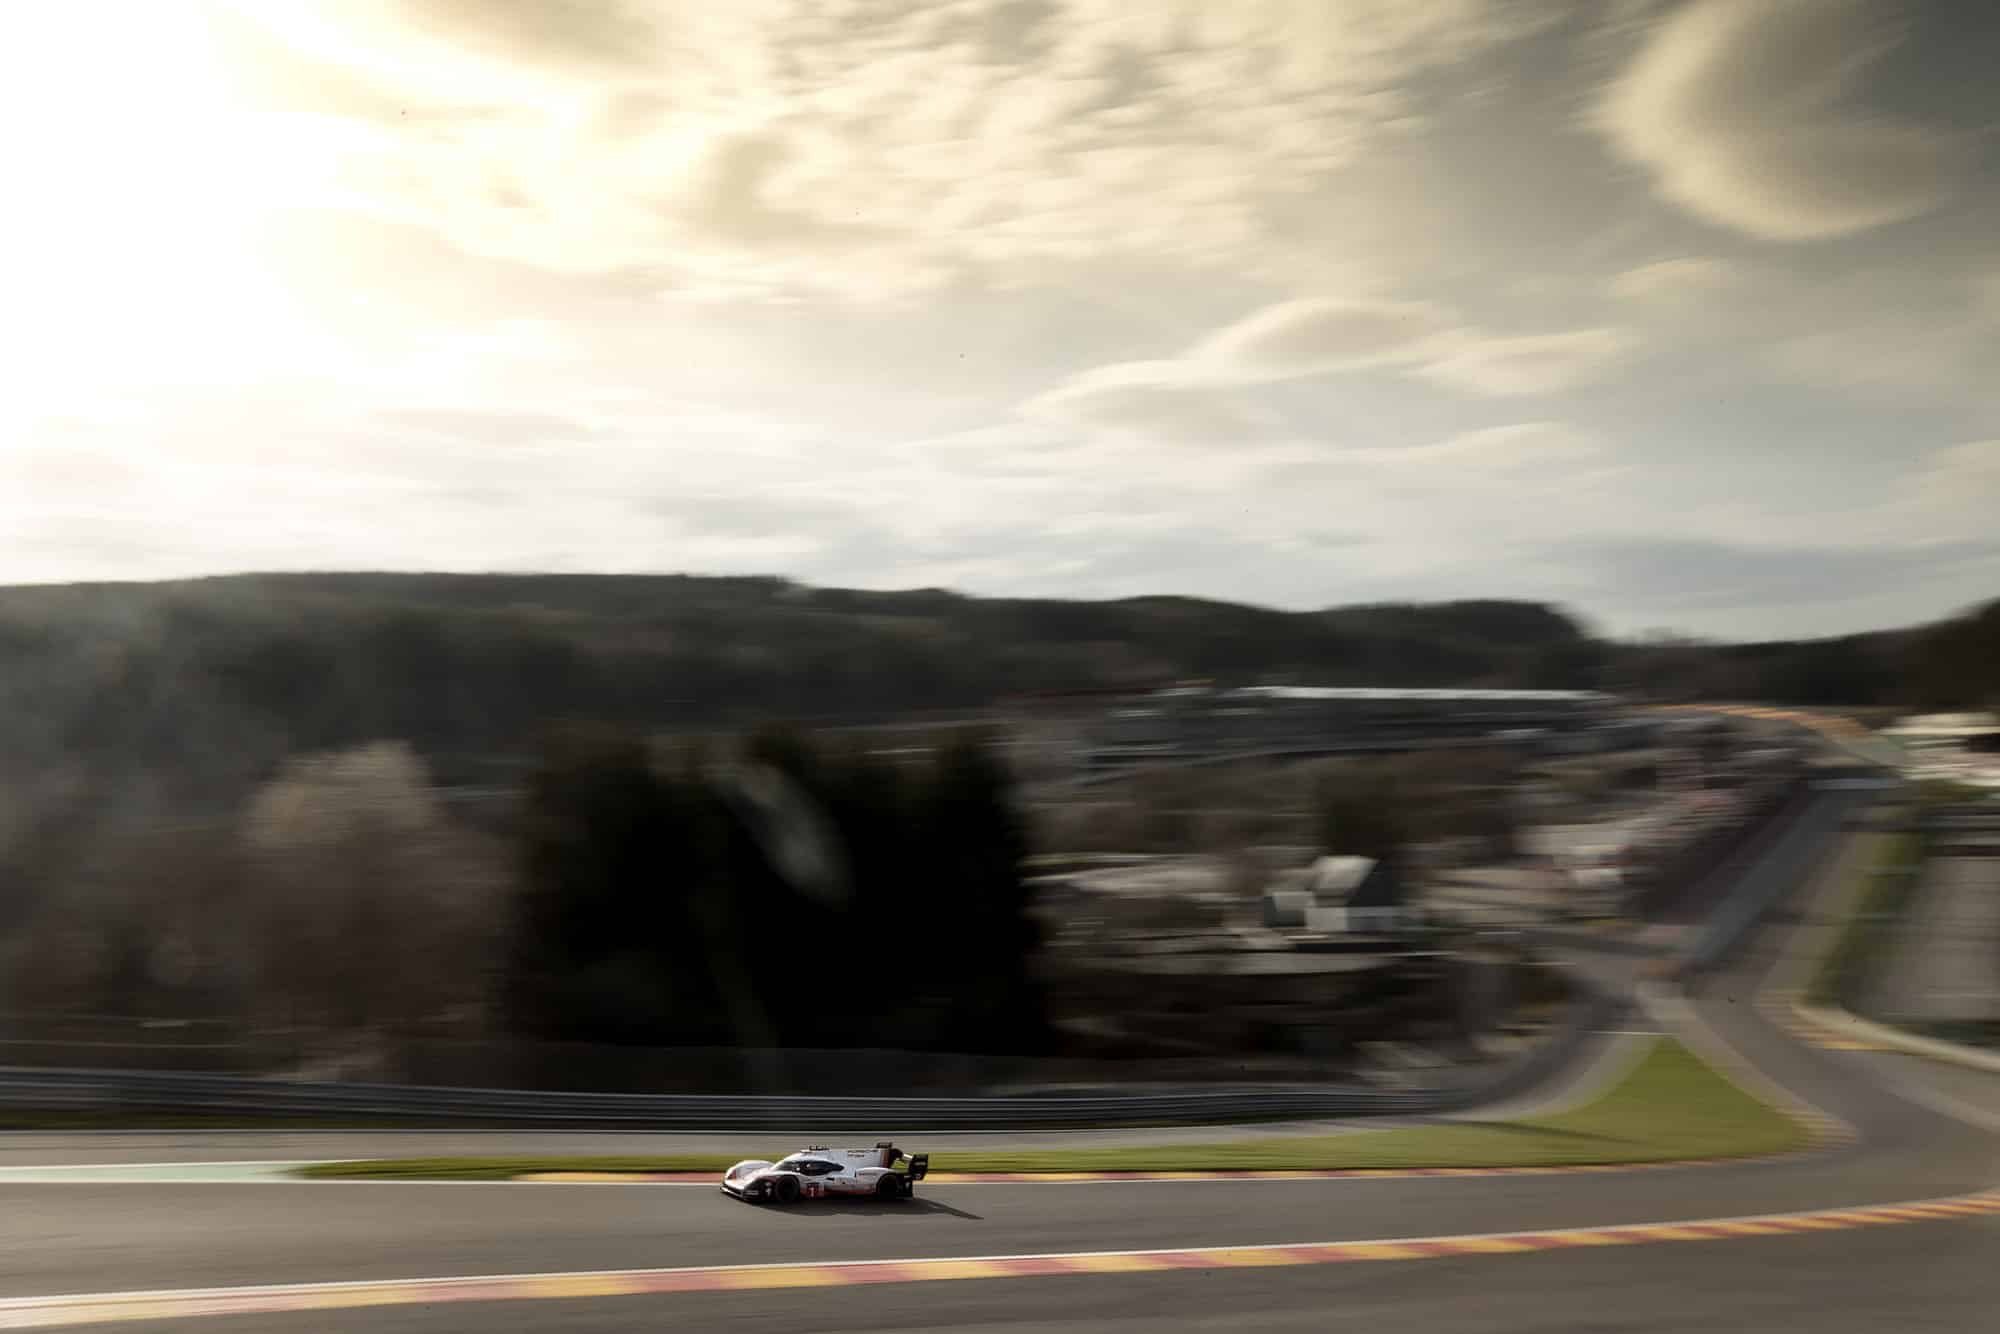 Porsche 919 Hybrid Evo drives up the hill from Eau Rouge at Spa